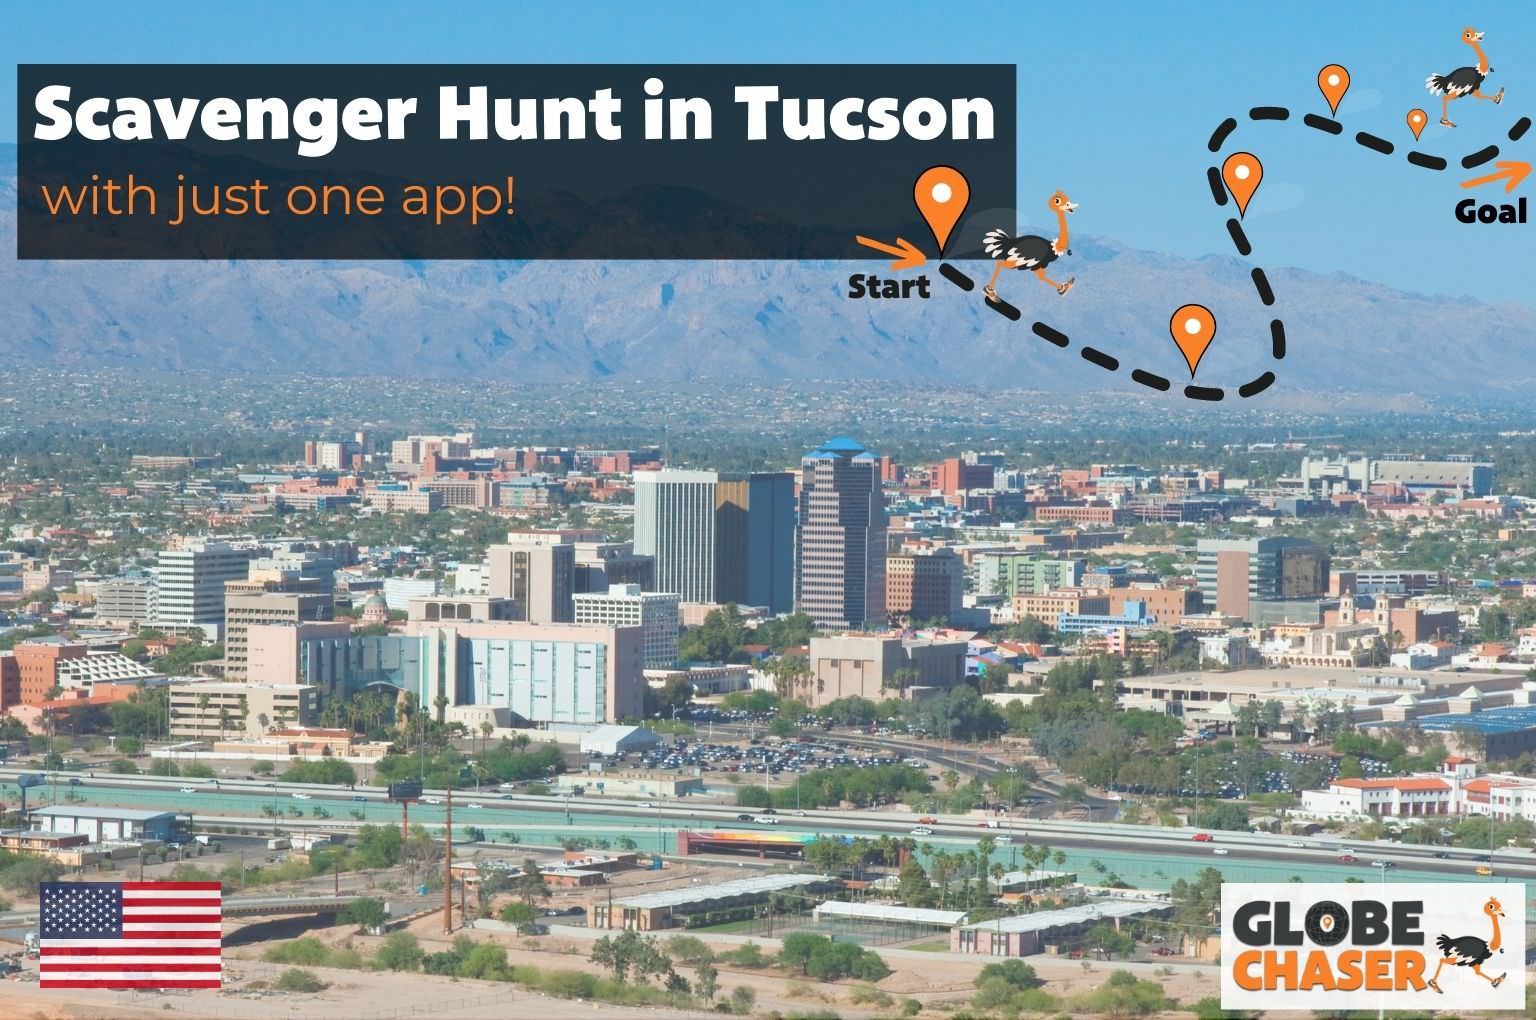 Scavenger Hunt in Tucson, USA - Family Activities with the Globe Chaser App for Outdoor Fun